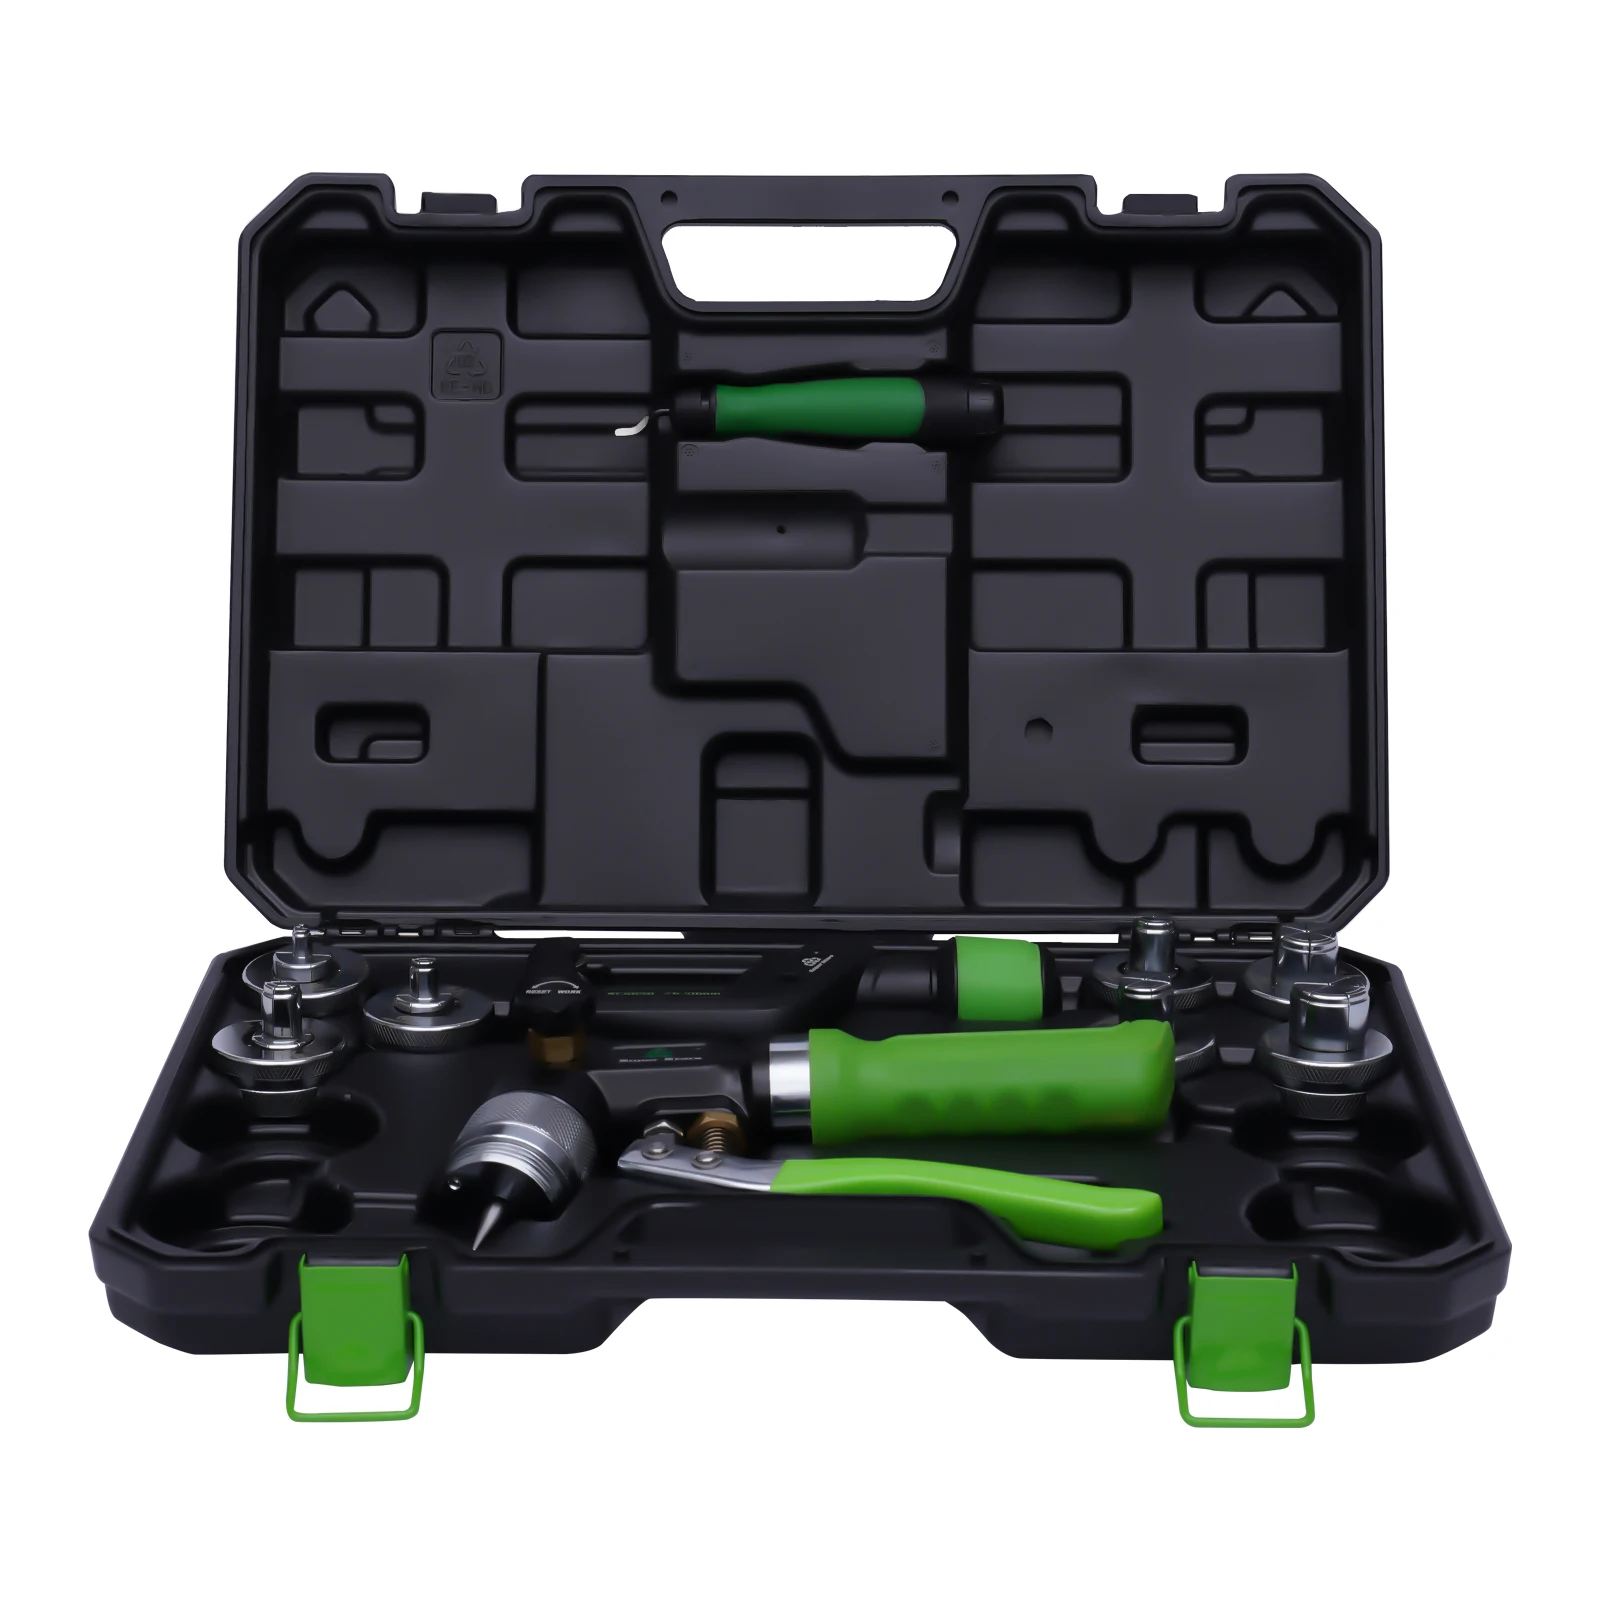 Hydraulic Expander Tube Compact Swaging Tool Kit for 3/8 to 1-1/8 Inches Copper Pipes 25kg electric welding auxiliary tools magnetics welding positioning tool electric welding holder right oblique angle multi angle fixer for welding pipes mounting bracket welding 45° 90° 135° 180° angle